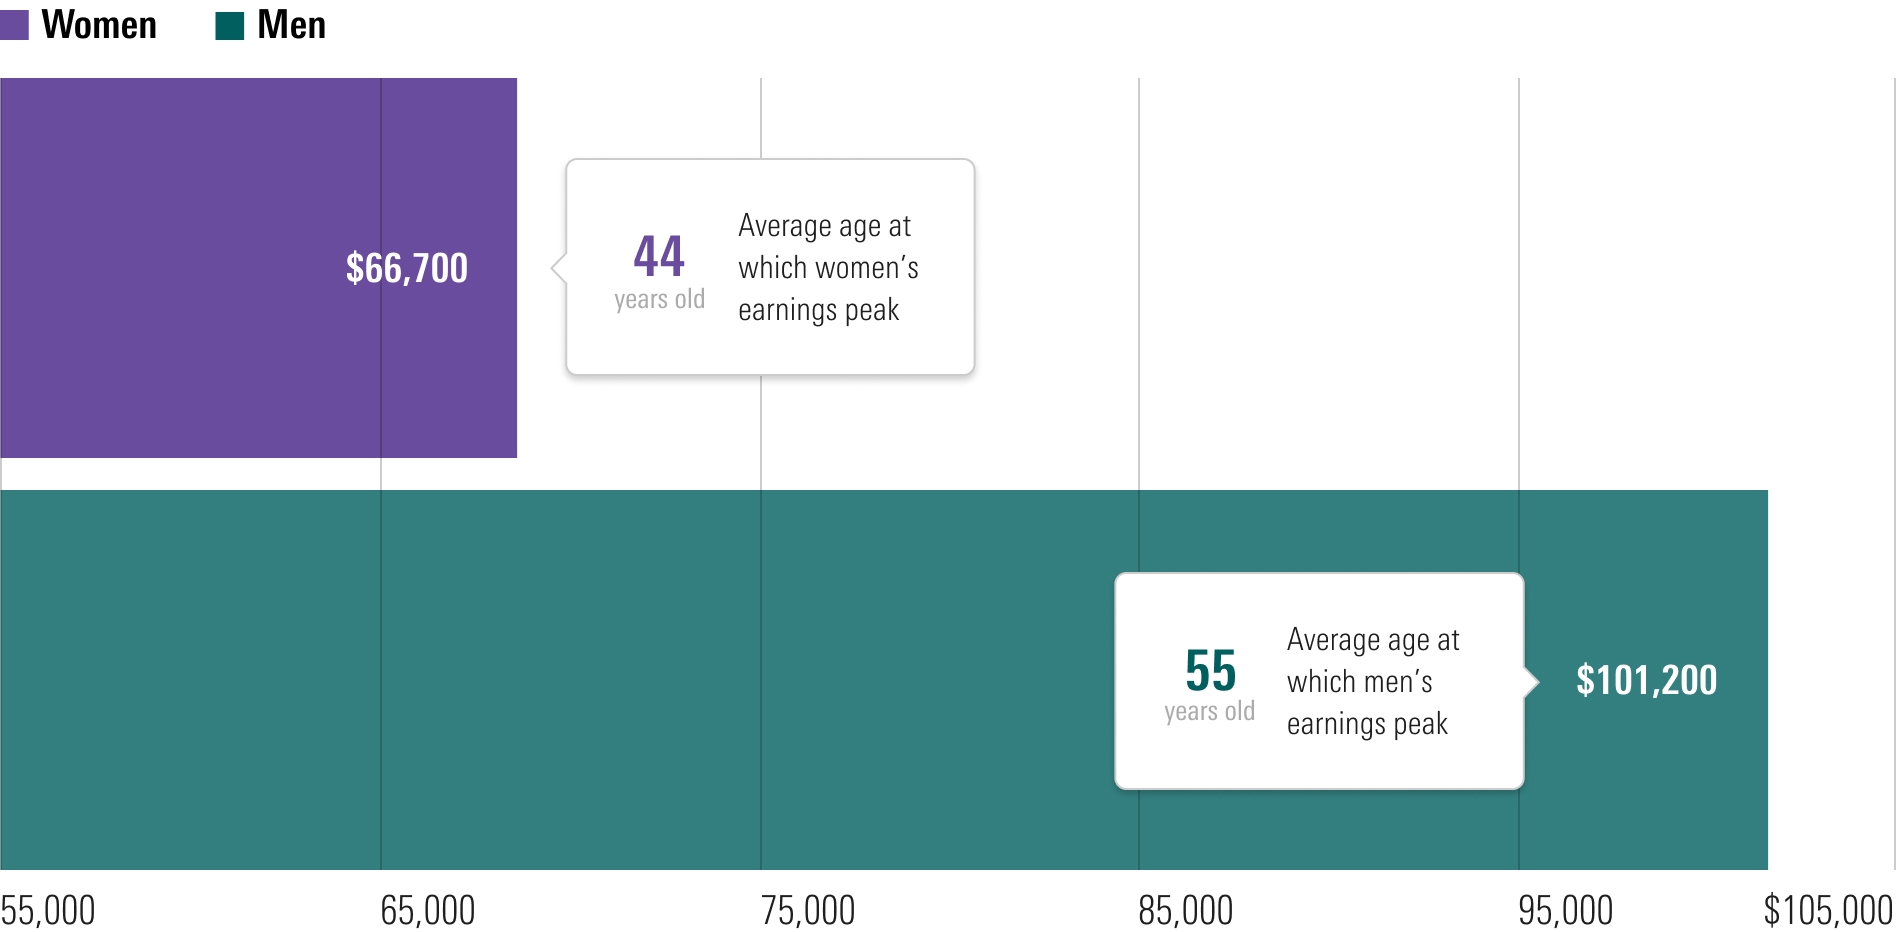 Horizontal bar chart showing how men and women’s earnings peak at differ amounts and ages.